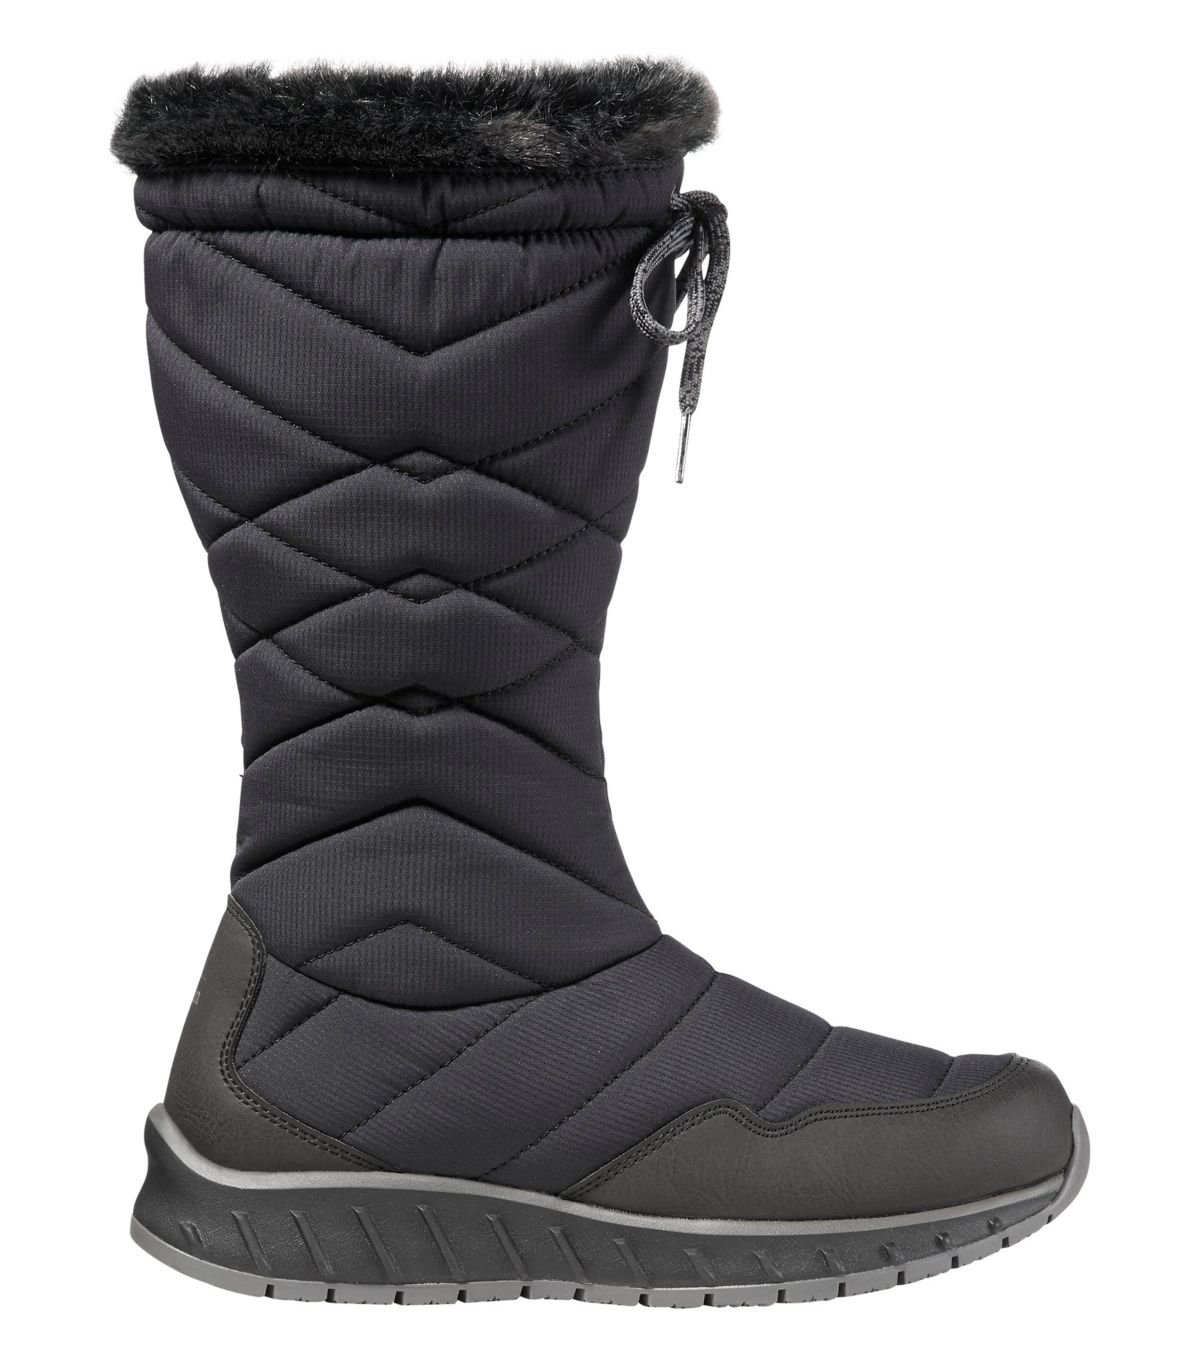 Women's Snowfield Waterproof Boots, Tall Insulated